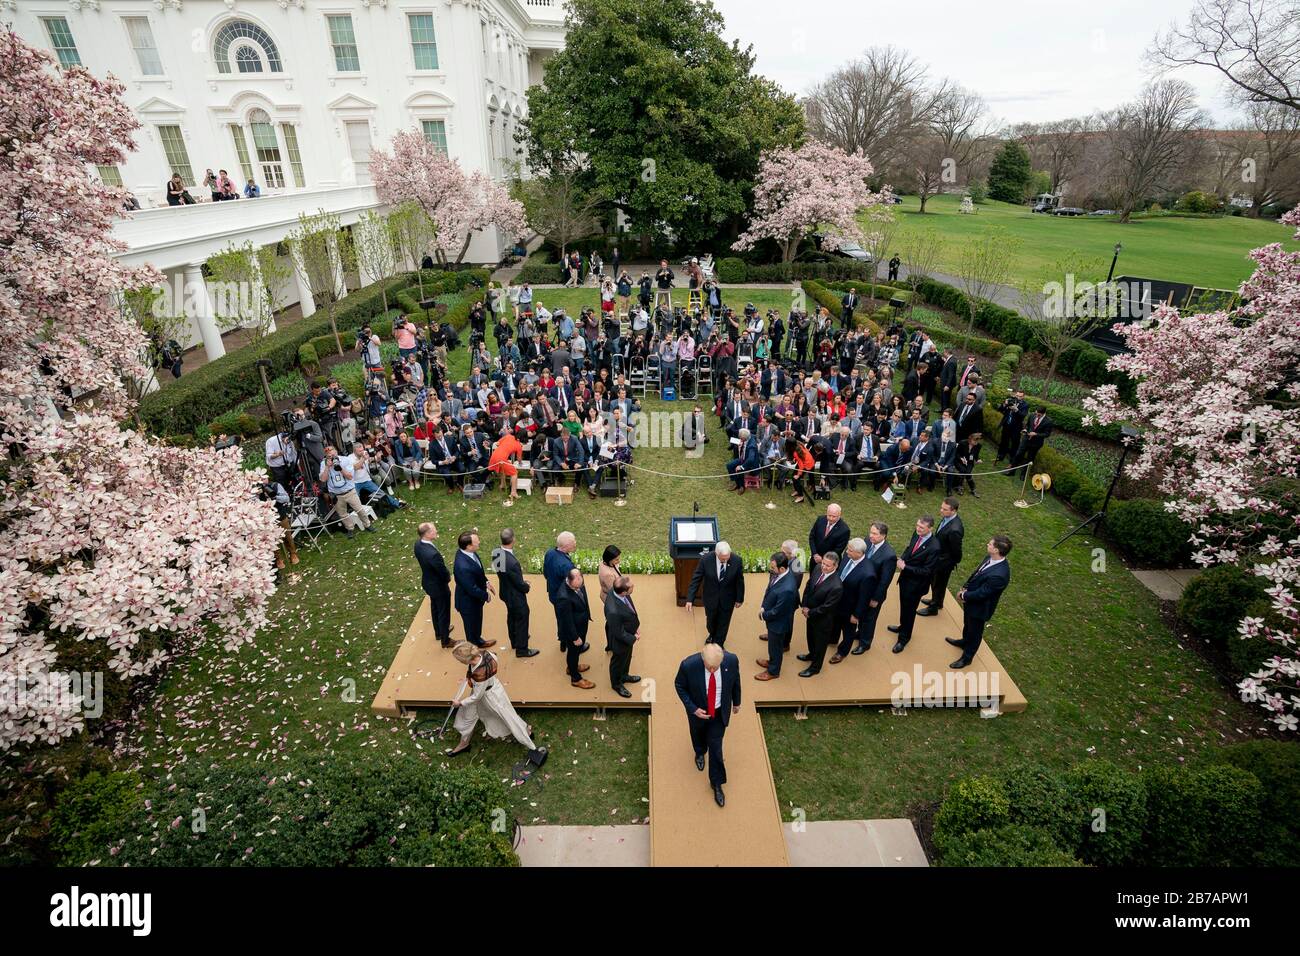 Washington, United States Of America. 13th Mar, 2020. Washington, United States of America. 13 March, 2020. U.S President Donald Trump walks back to the Oval Office following an announcement of a national emergency to combat the coronavirus outbreak in the Rose Garden of the White House March 13, 2020 in Washington, DC. Credit: Tia Dufour/White House Photo/Alamy Live News Stock Photo